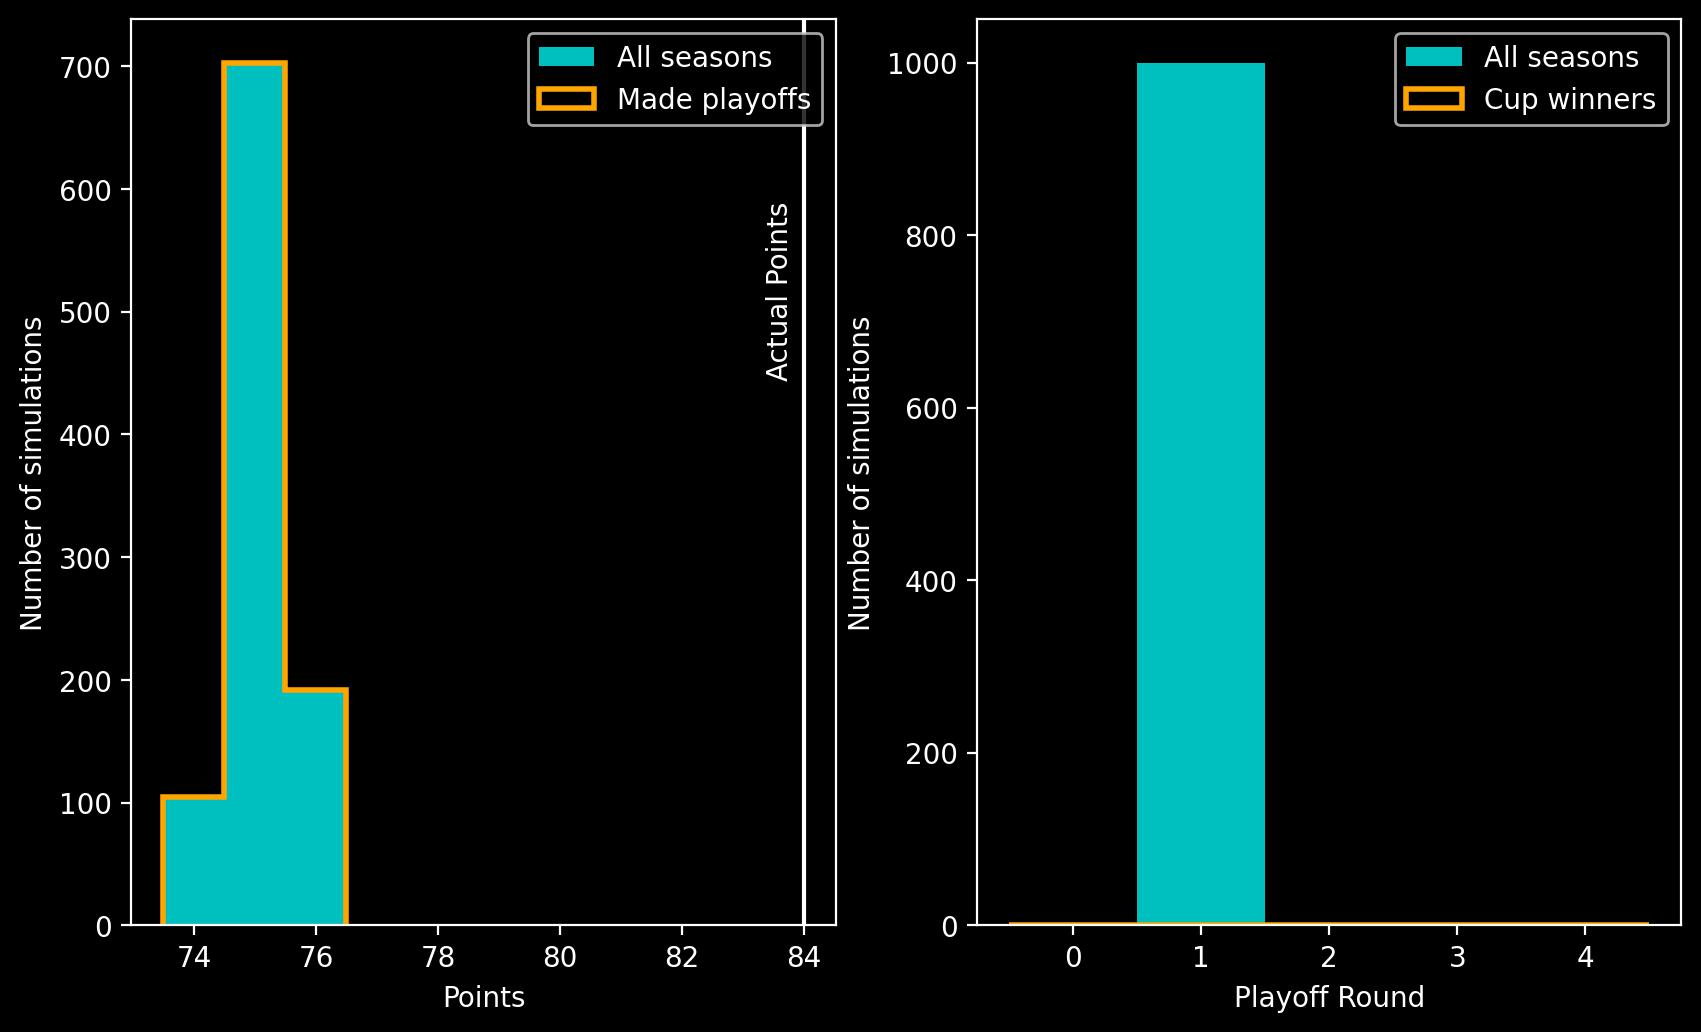 Two panel plot showing histograms. Left panel shows a histogram of points on the x-axis against number of simulations on the y-axis, the peak is at 75 points. Right panel shows playoff round on the x-axis against number of simulations on the y-axis. The largest bar is at playoff round 1.